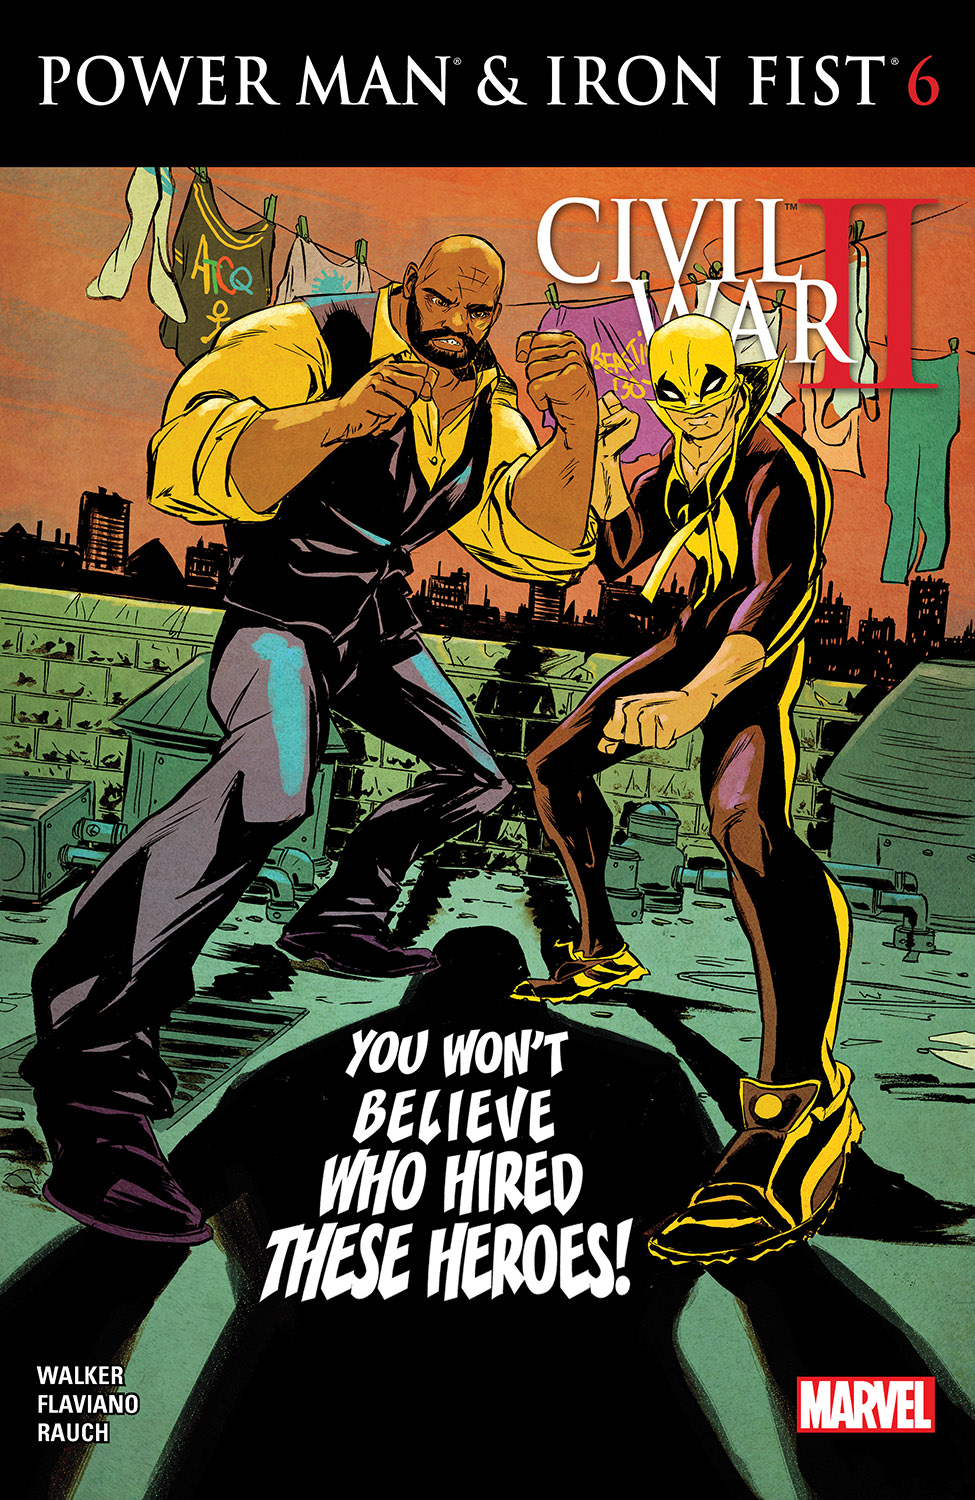 Power Man and Iron Fist (2016) #6